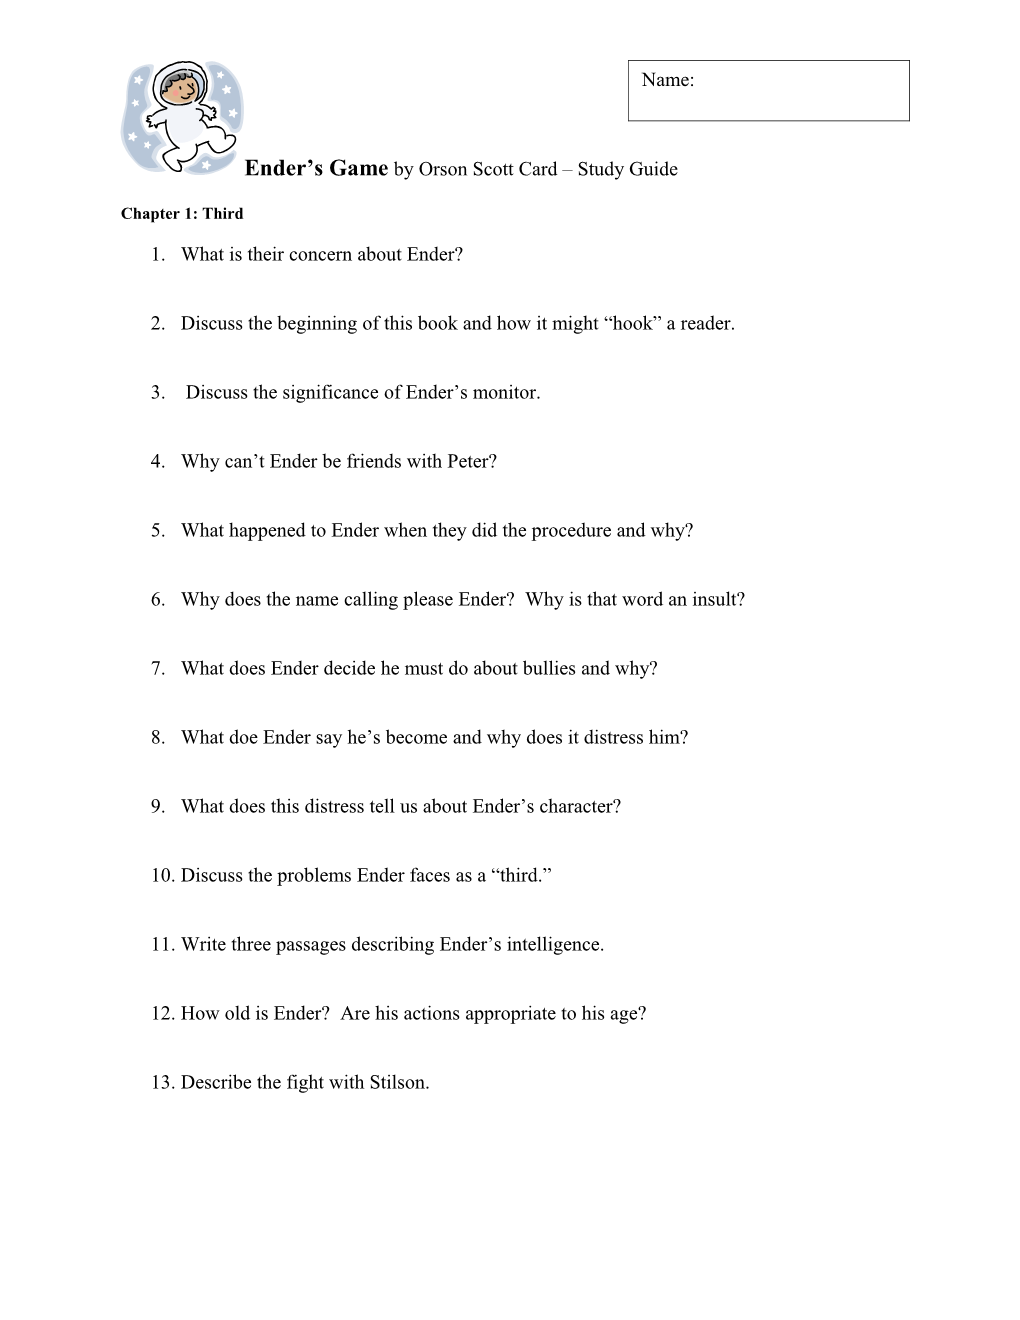 Ender S Game by Orson Scott Card Study Guide